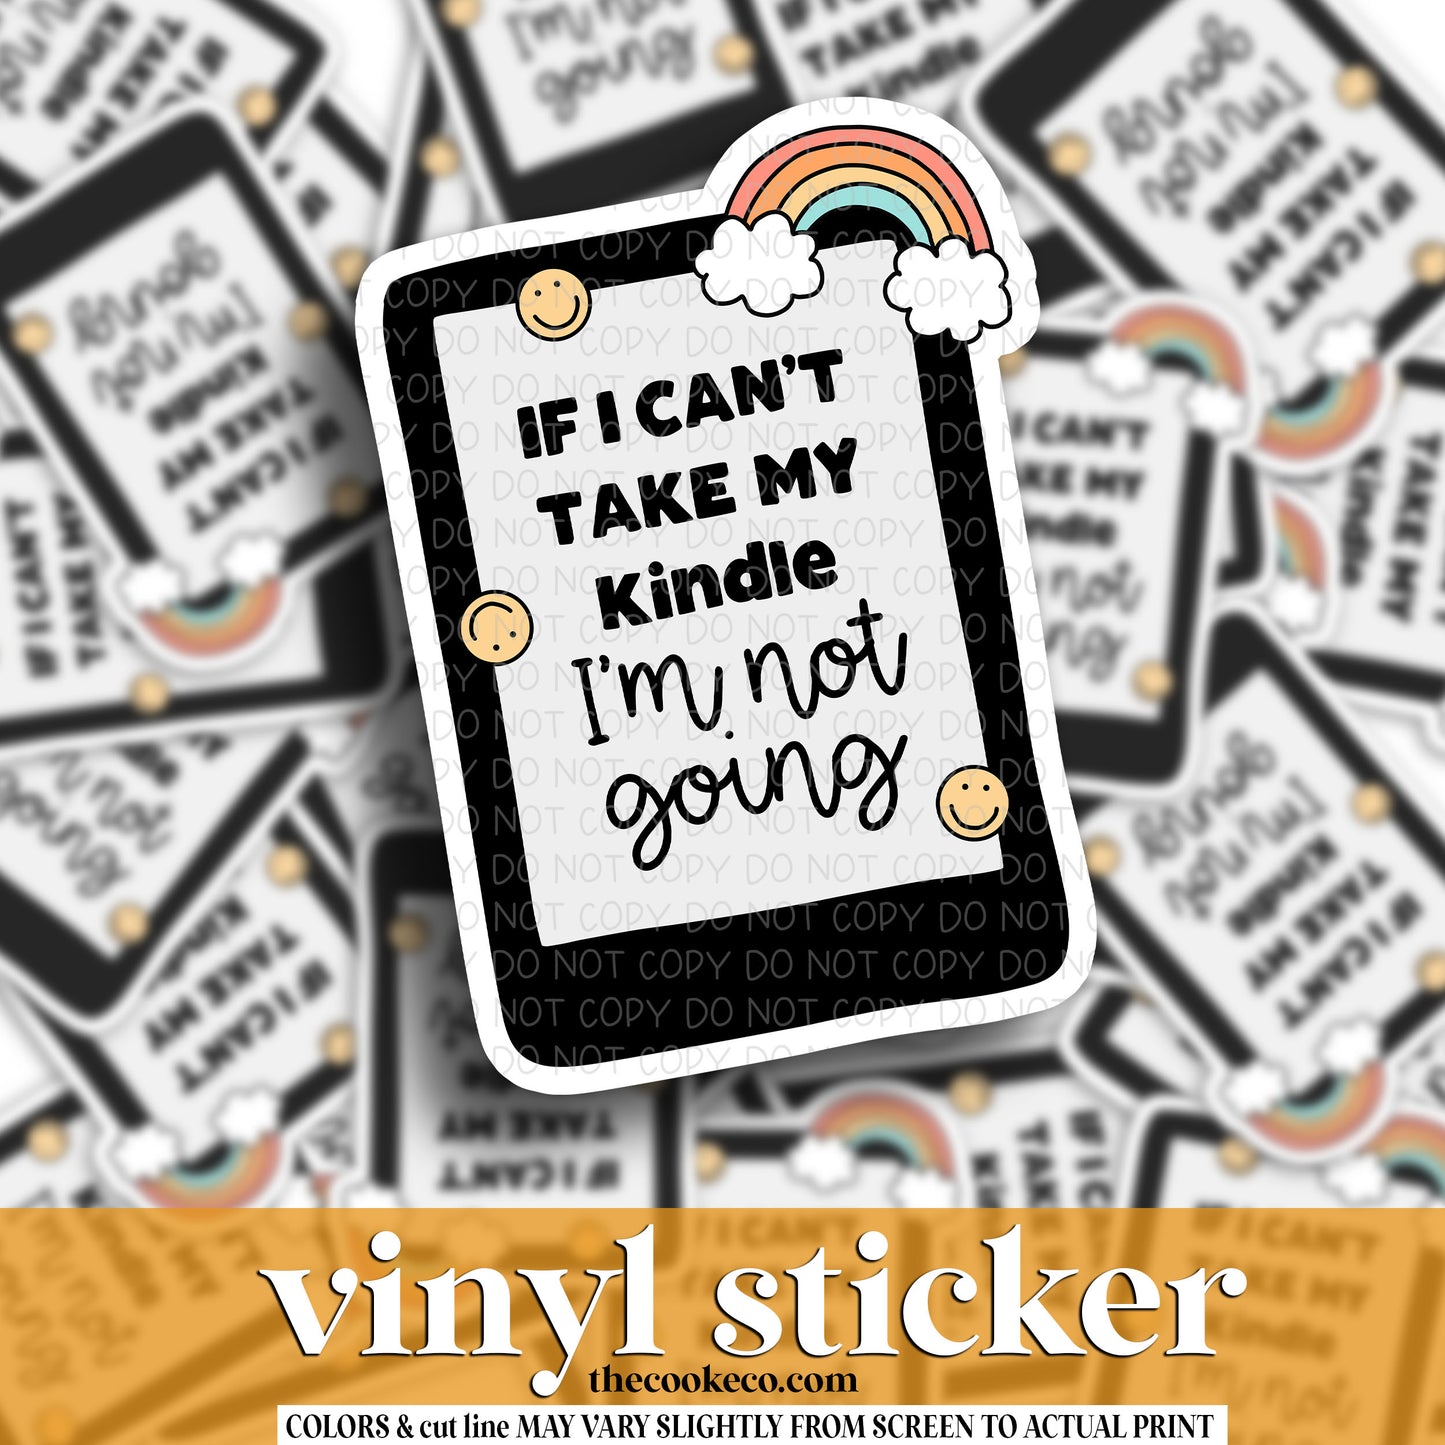 Vinyl Sticker | #V1431 - IF I CAN'T TAKE MY KINDLE I'M NOT GOING